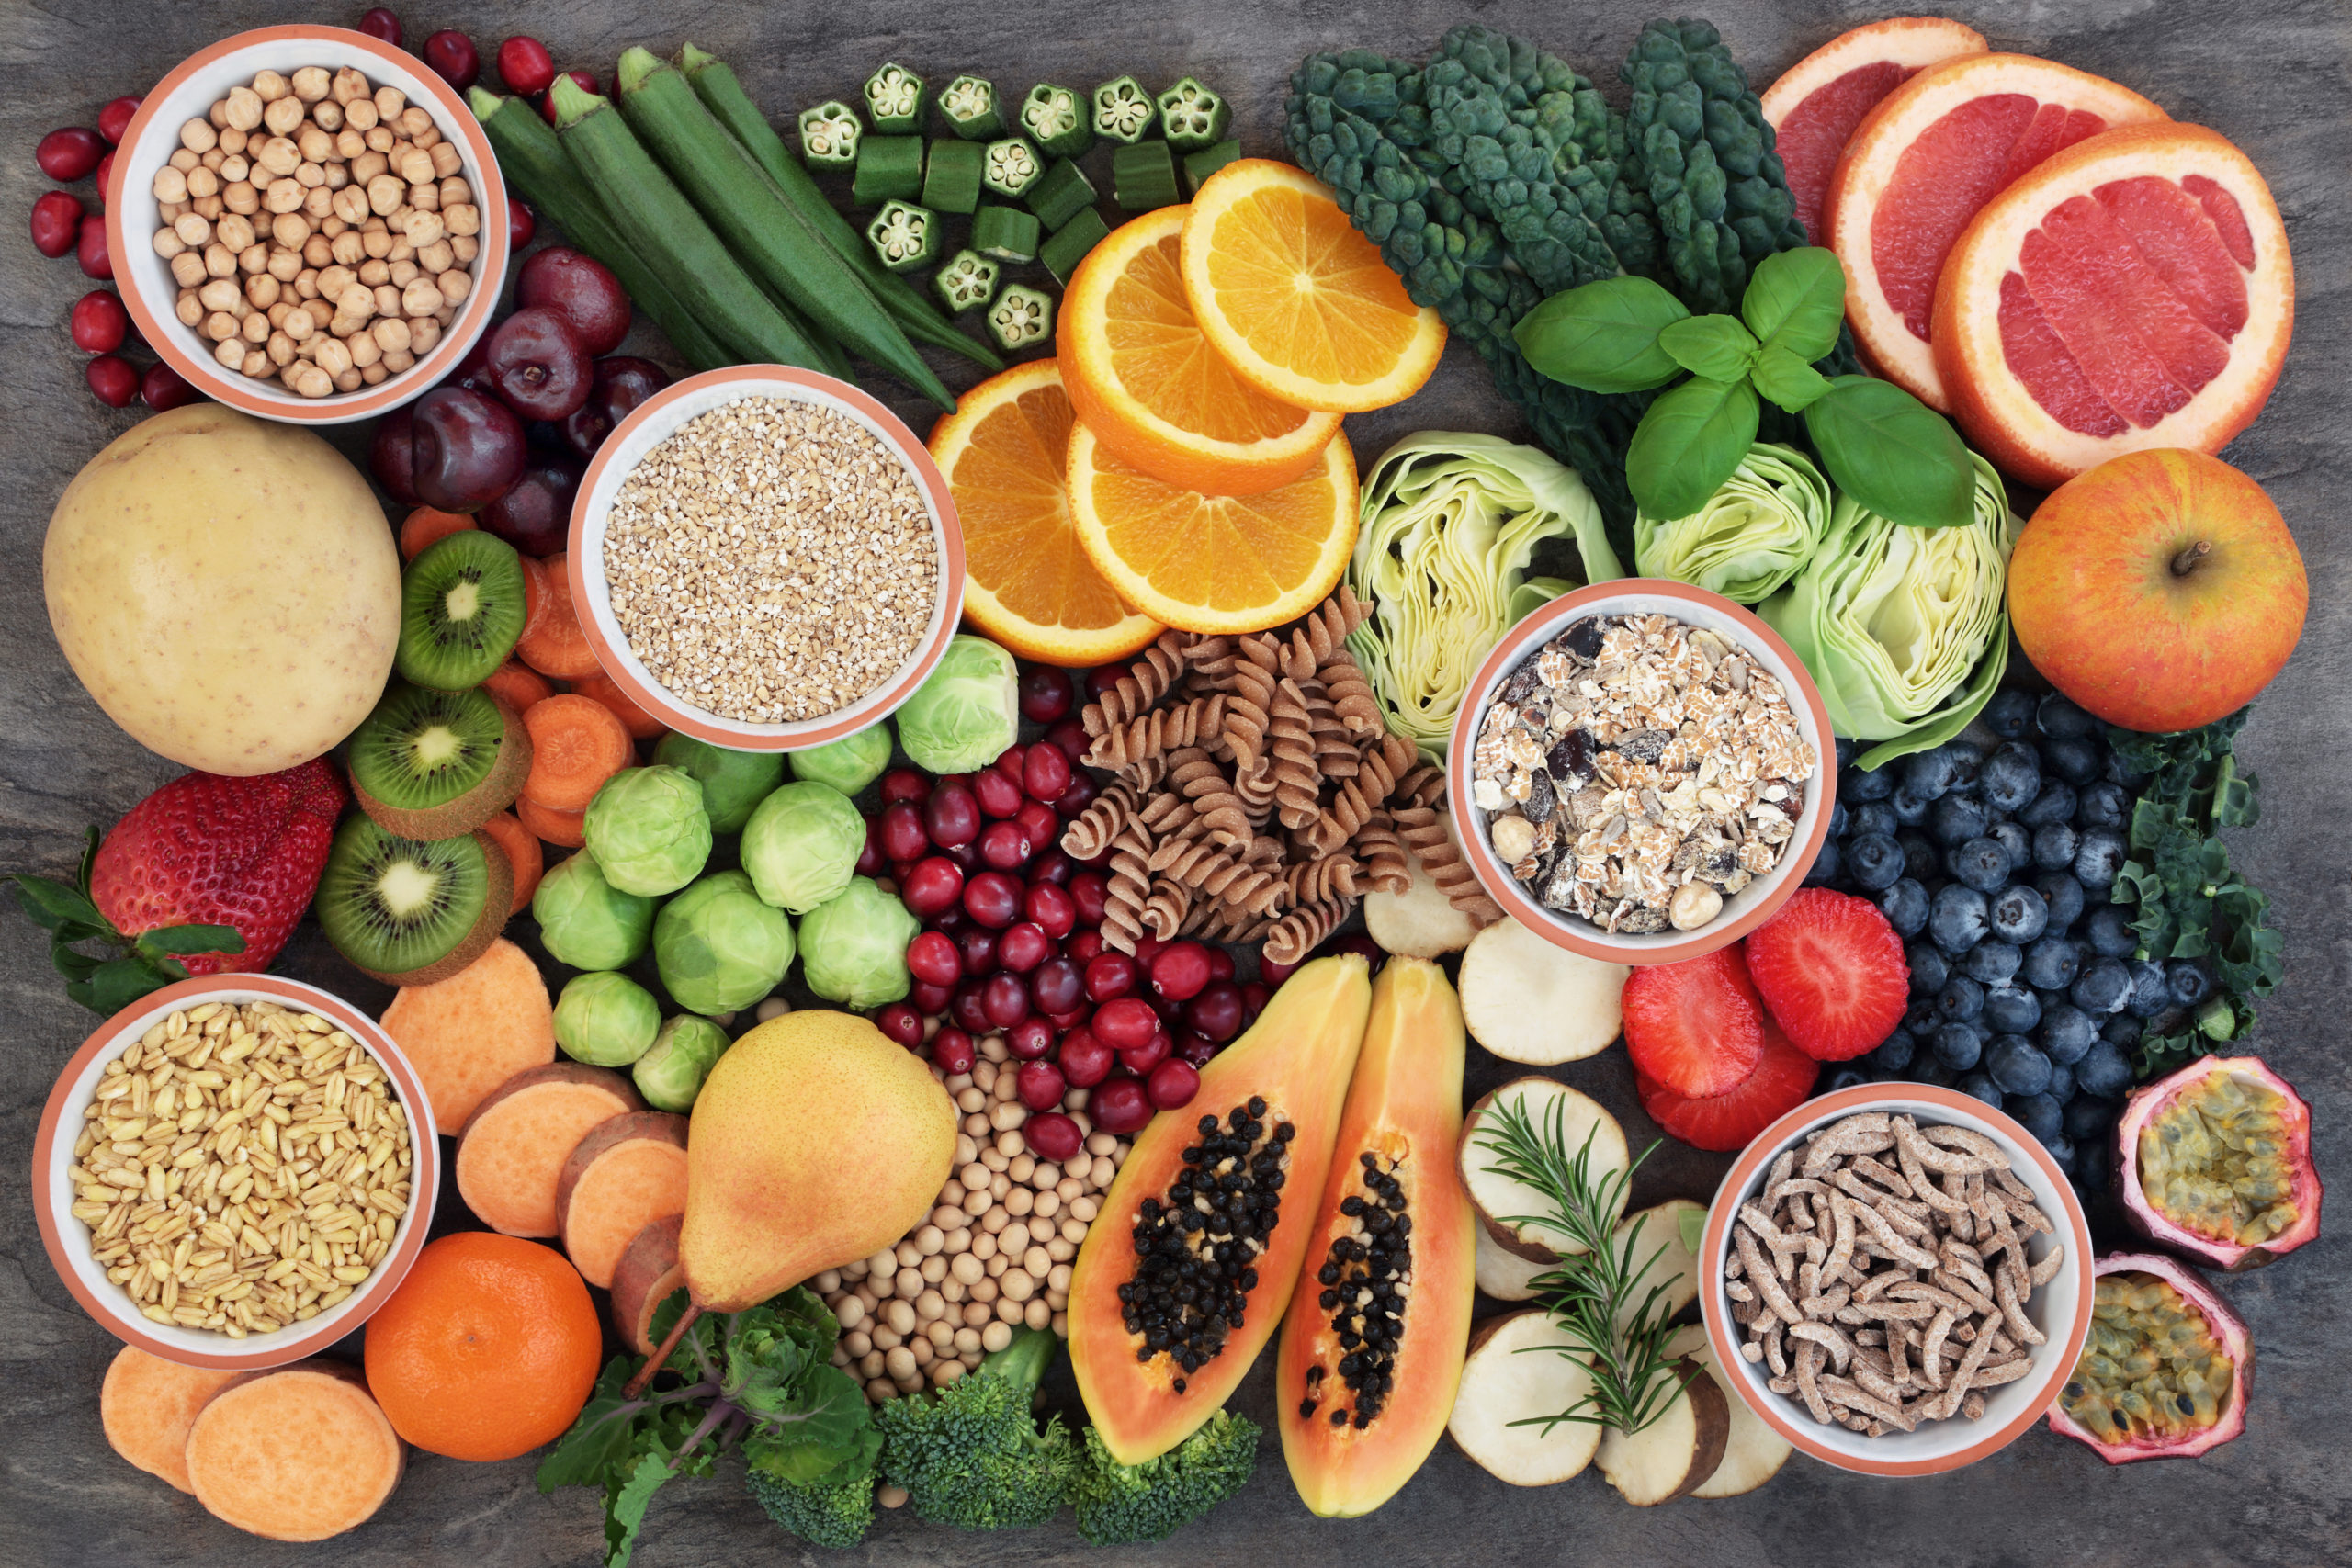 Health food concept for a high fiber diet with fruit, vegetables, cereals, whole wheat pasta, grains, legumes and herbs. Foods high in anthocyanins, antioxidants, smart carbohydrates and vitamins on marble background top view.